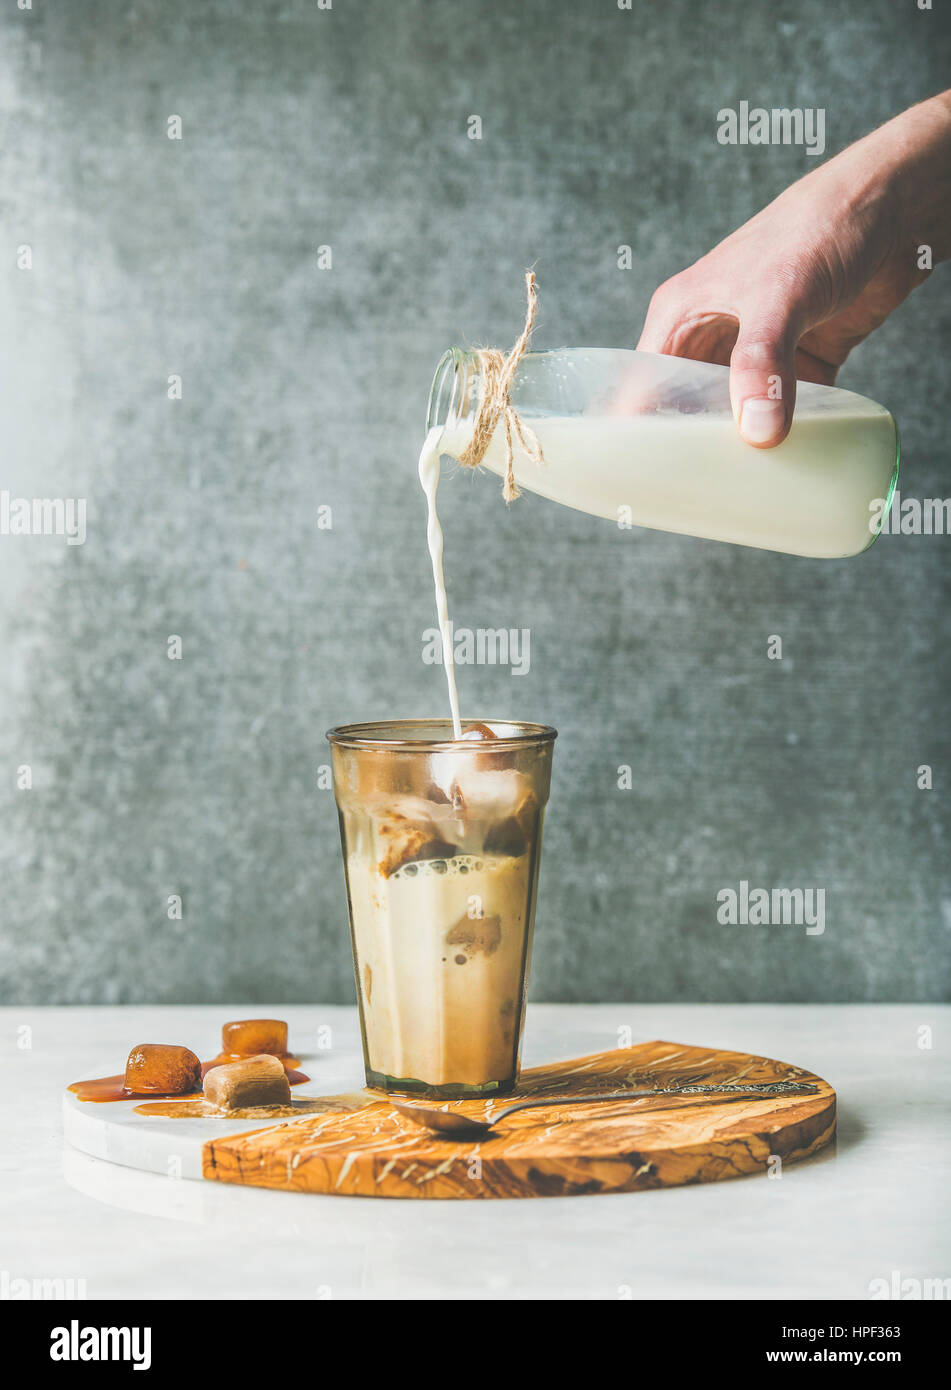 Man's hand pouring milk to Iced caramel latte coffee cocktail with frozen coffee ice cubes in glass on serving wood and marble board over grey table, Stock Photo